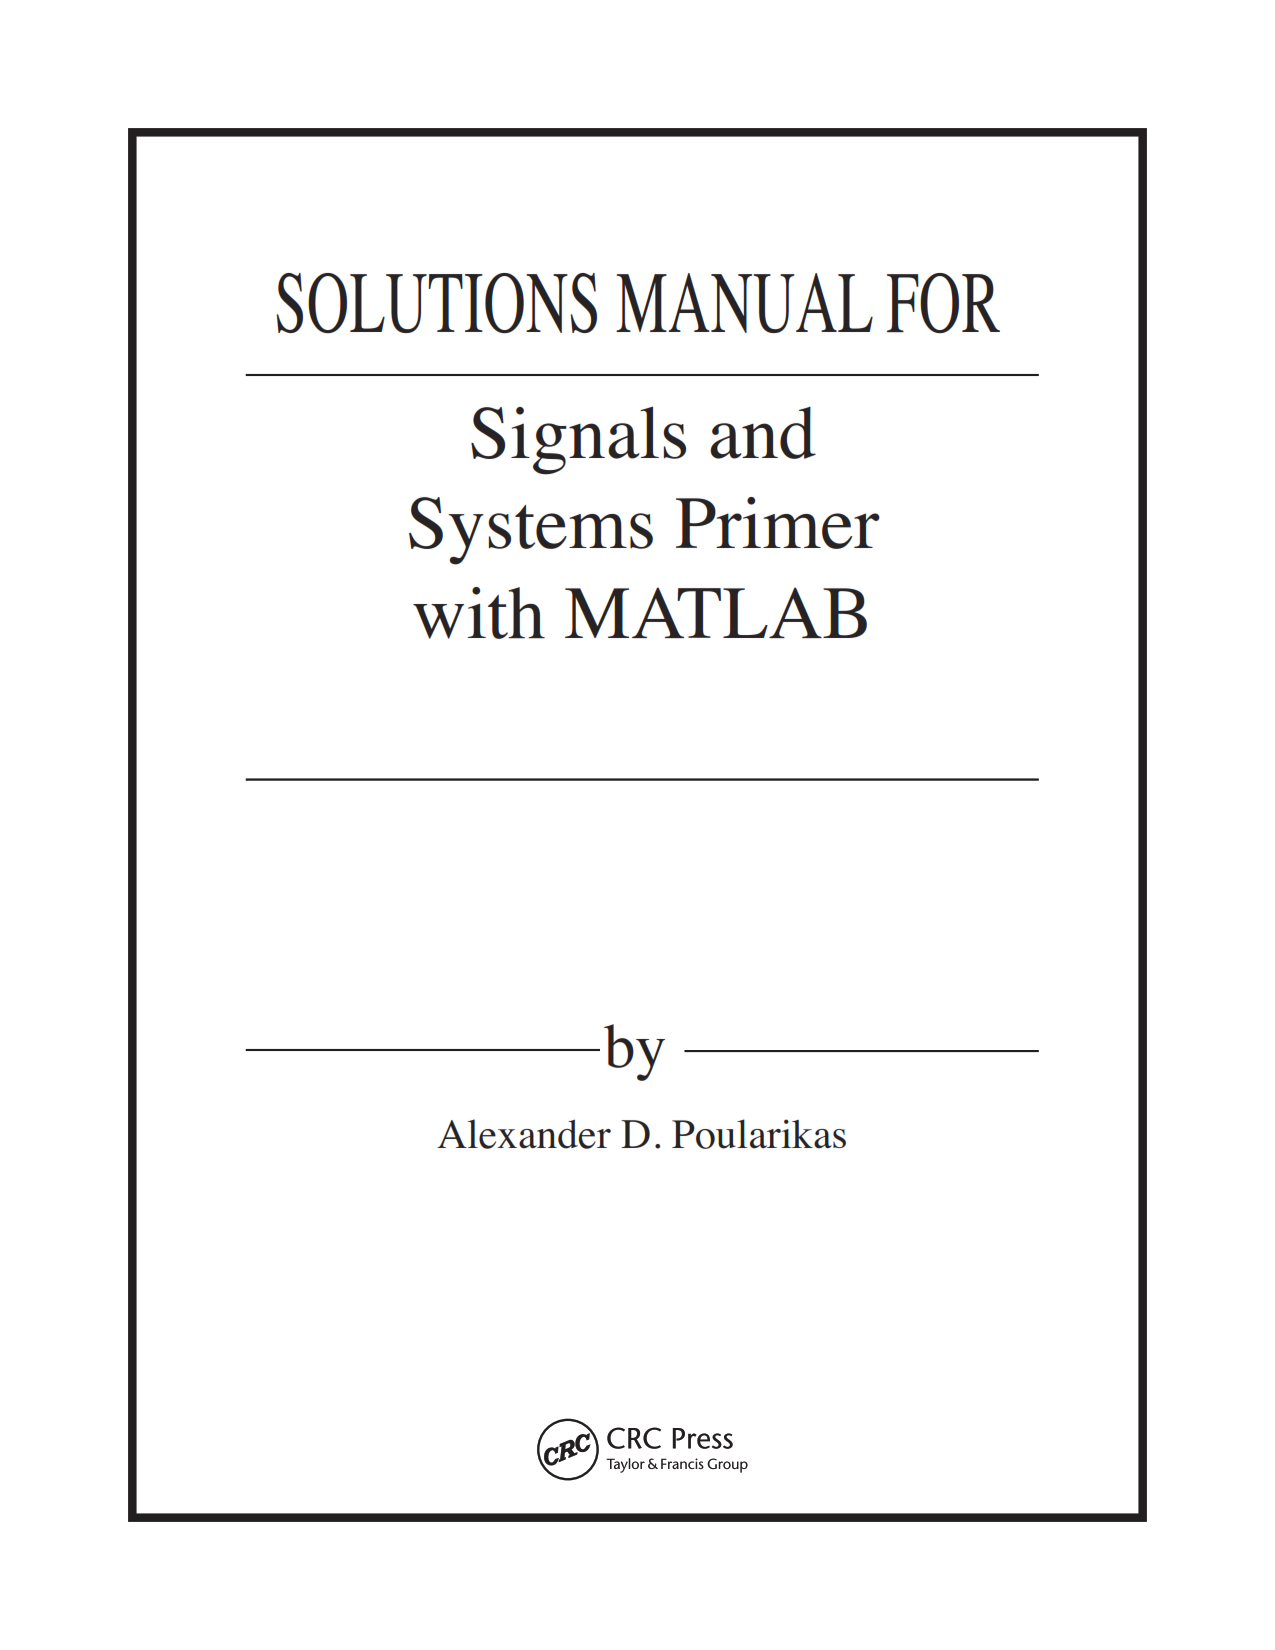 Download free signal and system primer with matlab by Alexander D. Poularikas solution manual pdf | gioumeh solutions